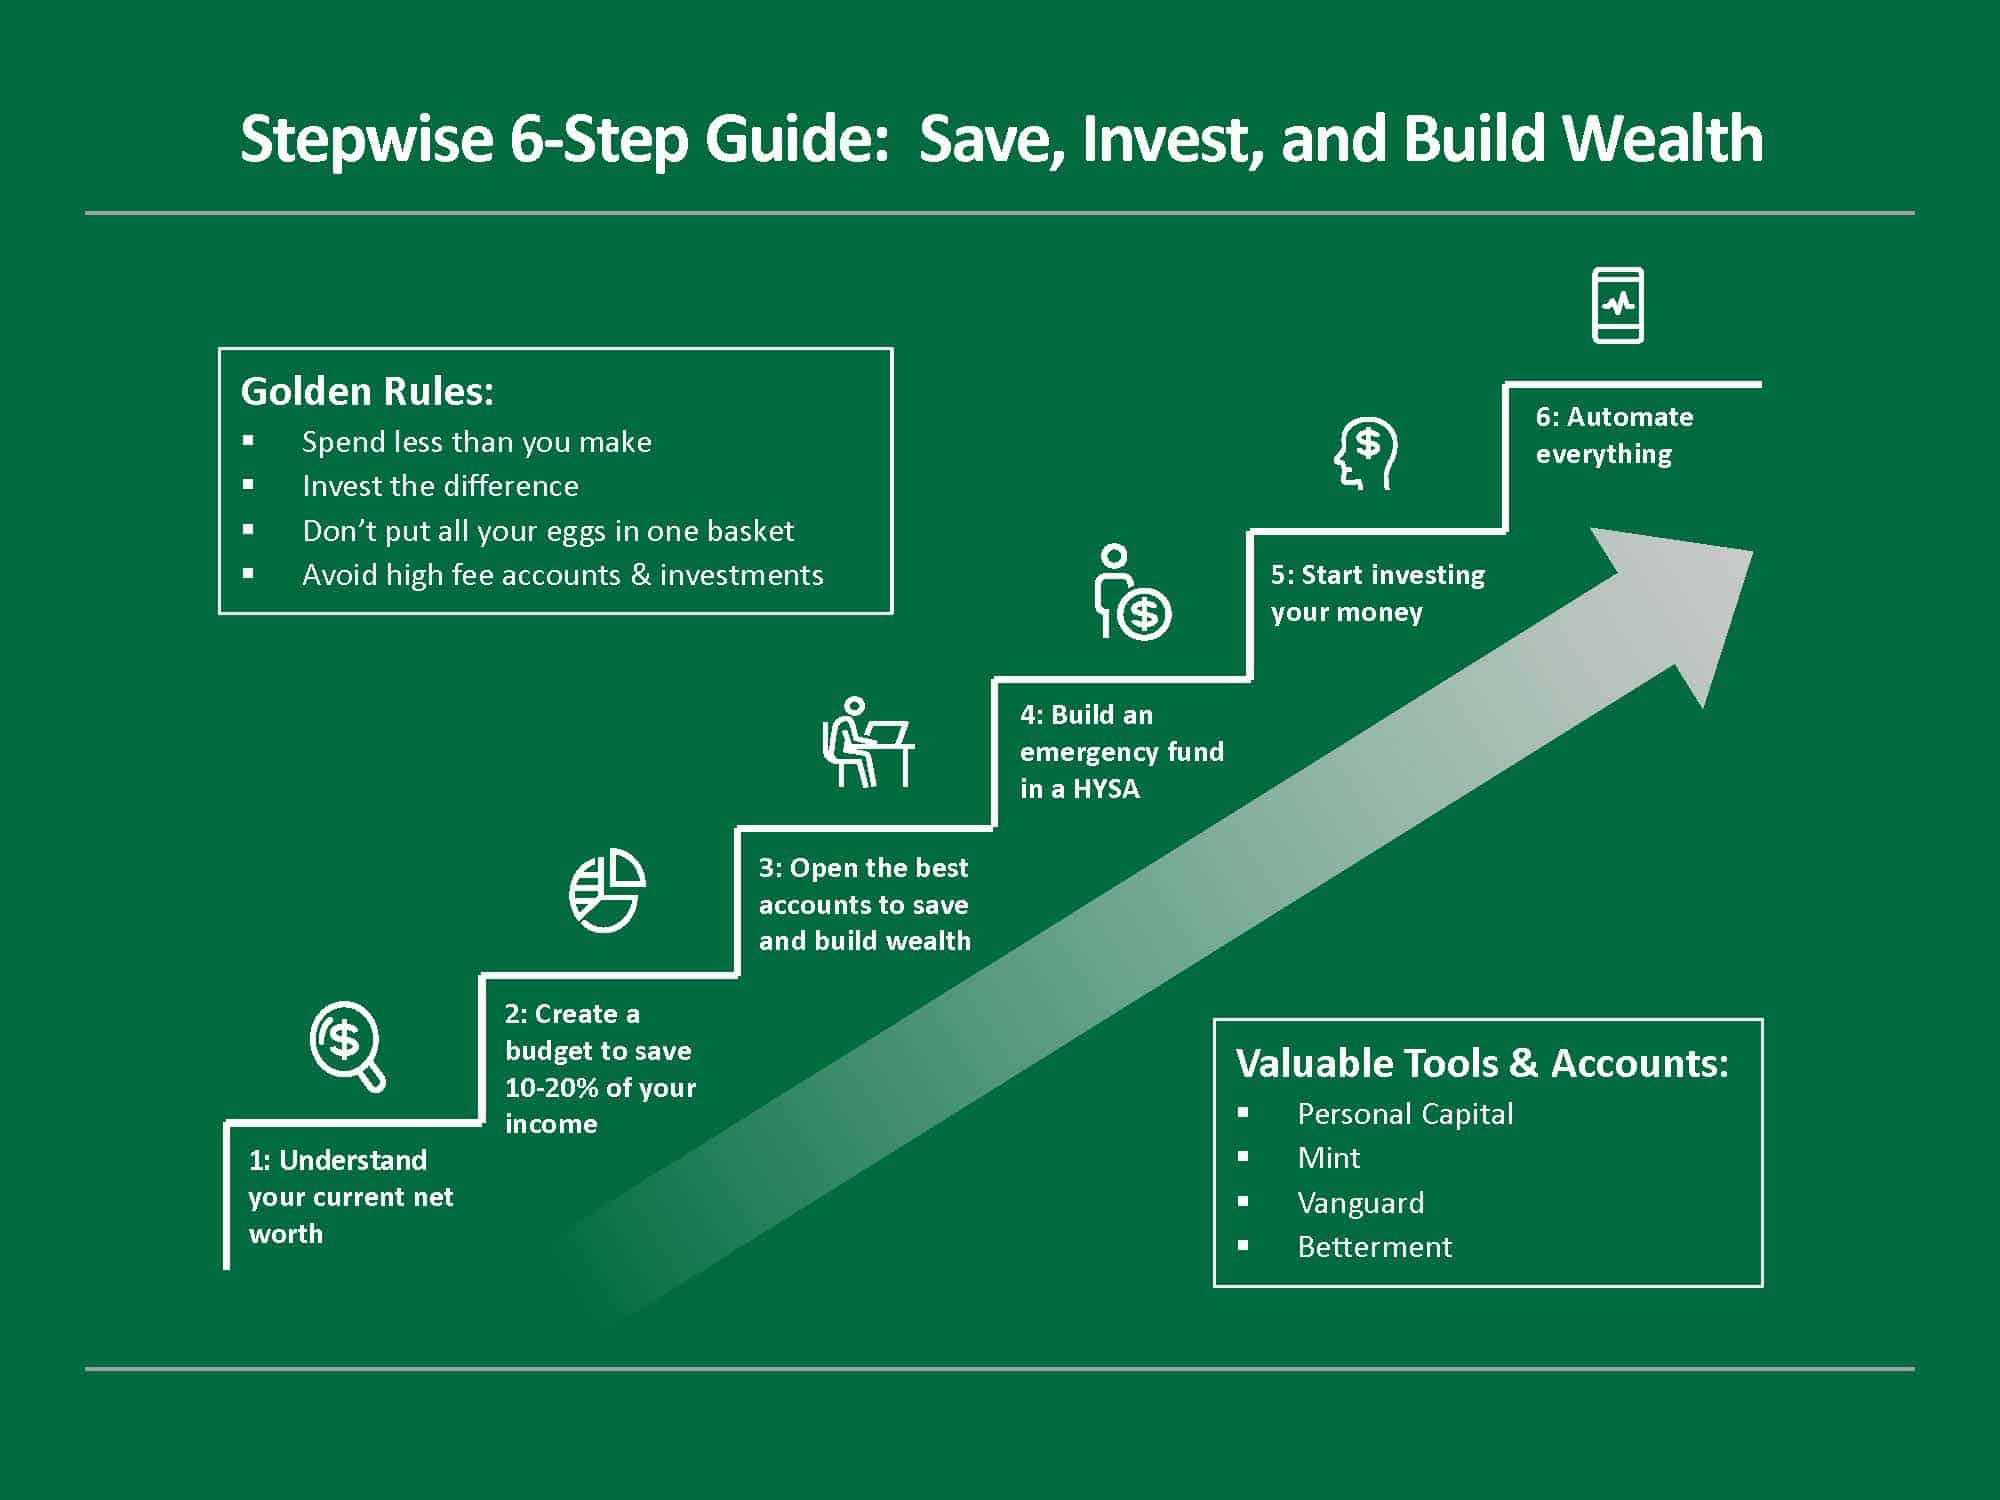 6-Step Guide: How To Save, Invest, And Build Wealth